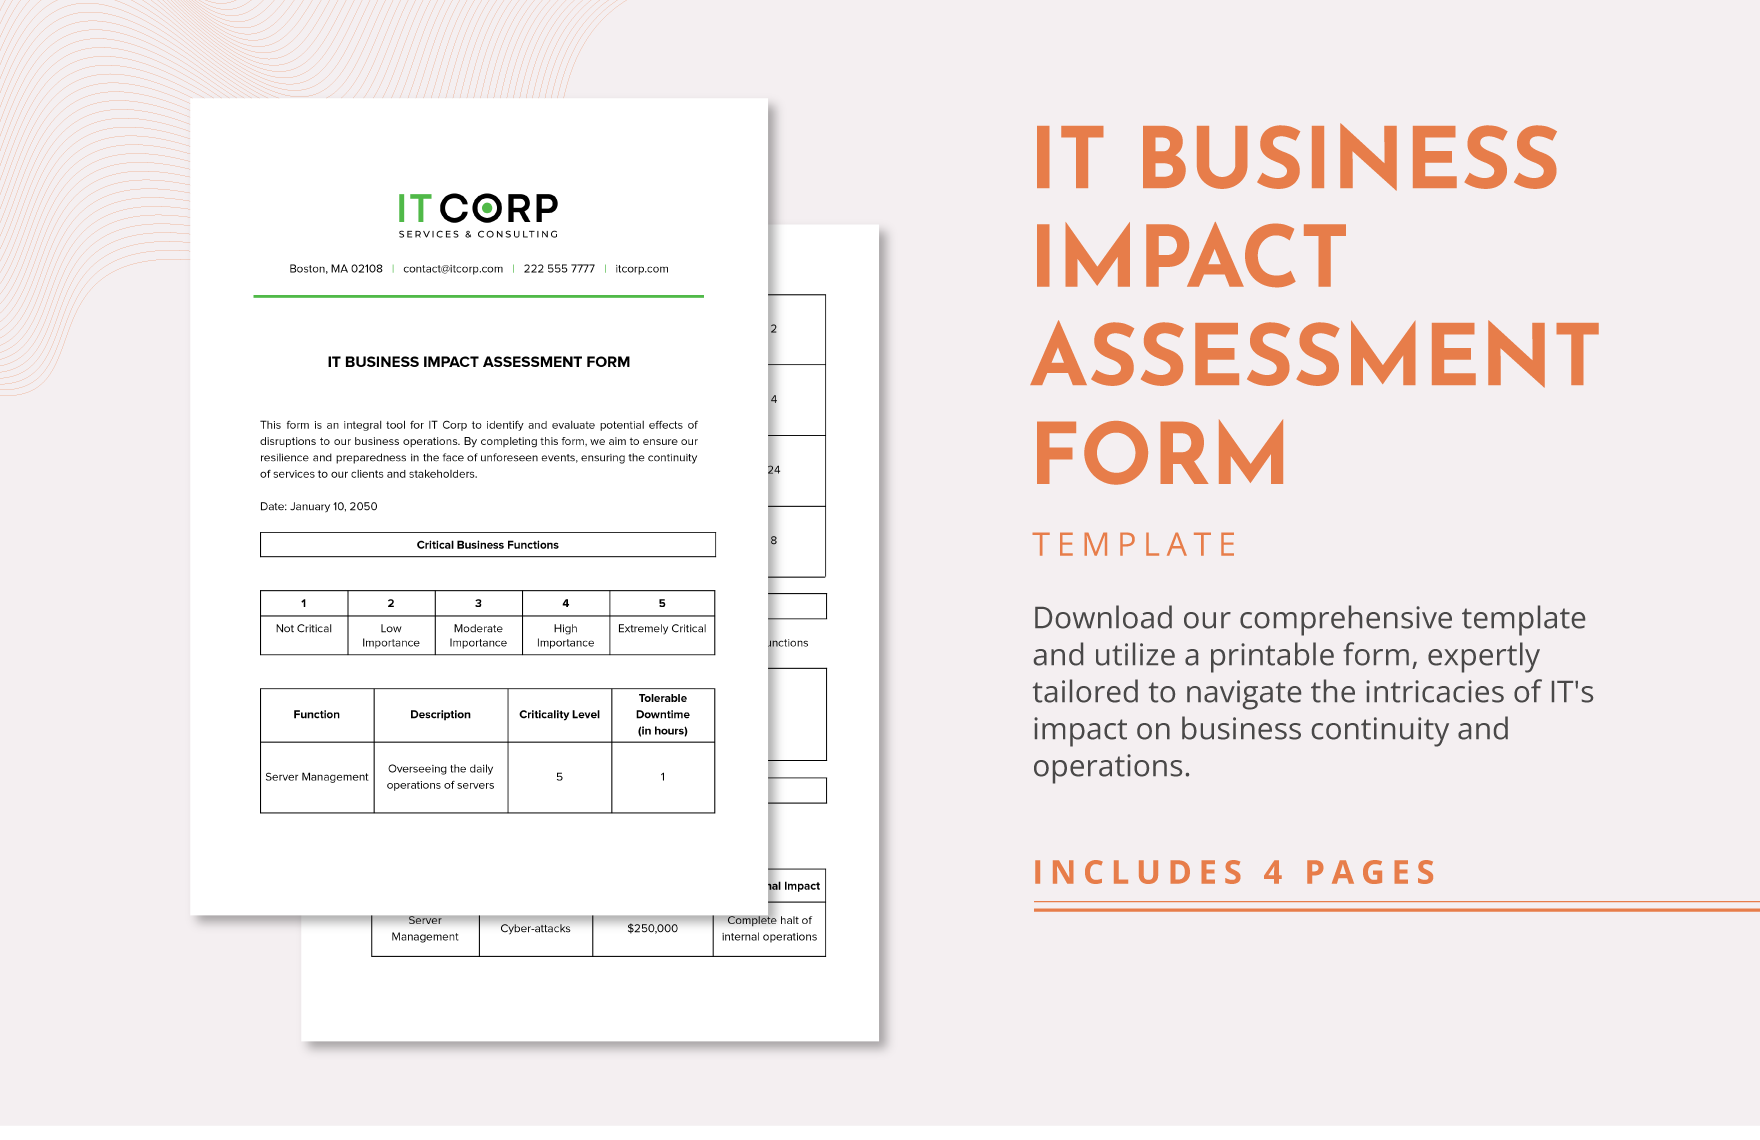 IT Business Impact Assessment Form Template in Word, Google Docs, PDF